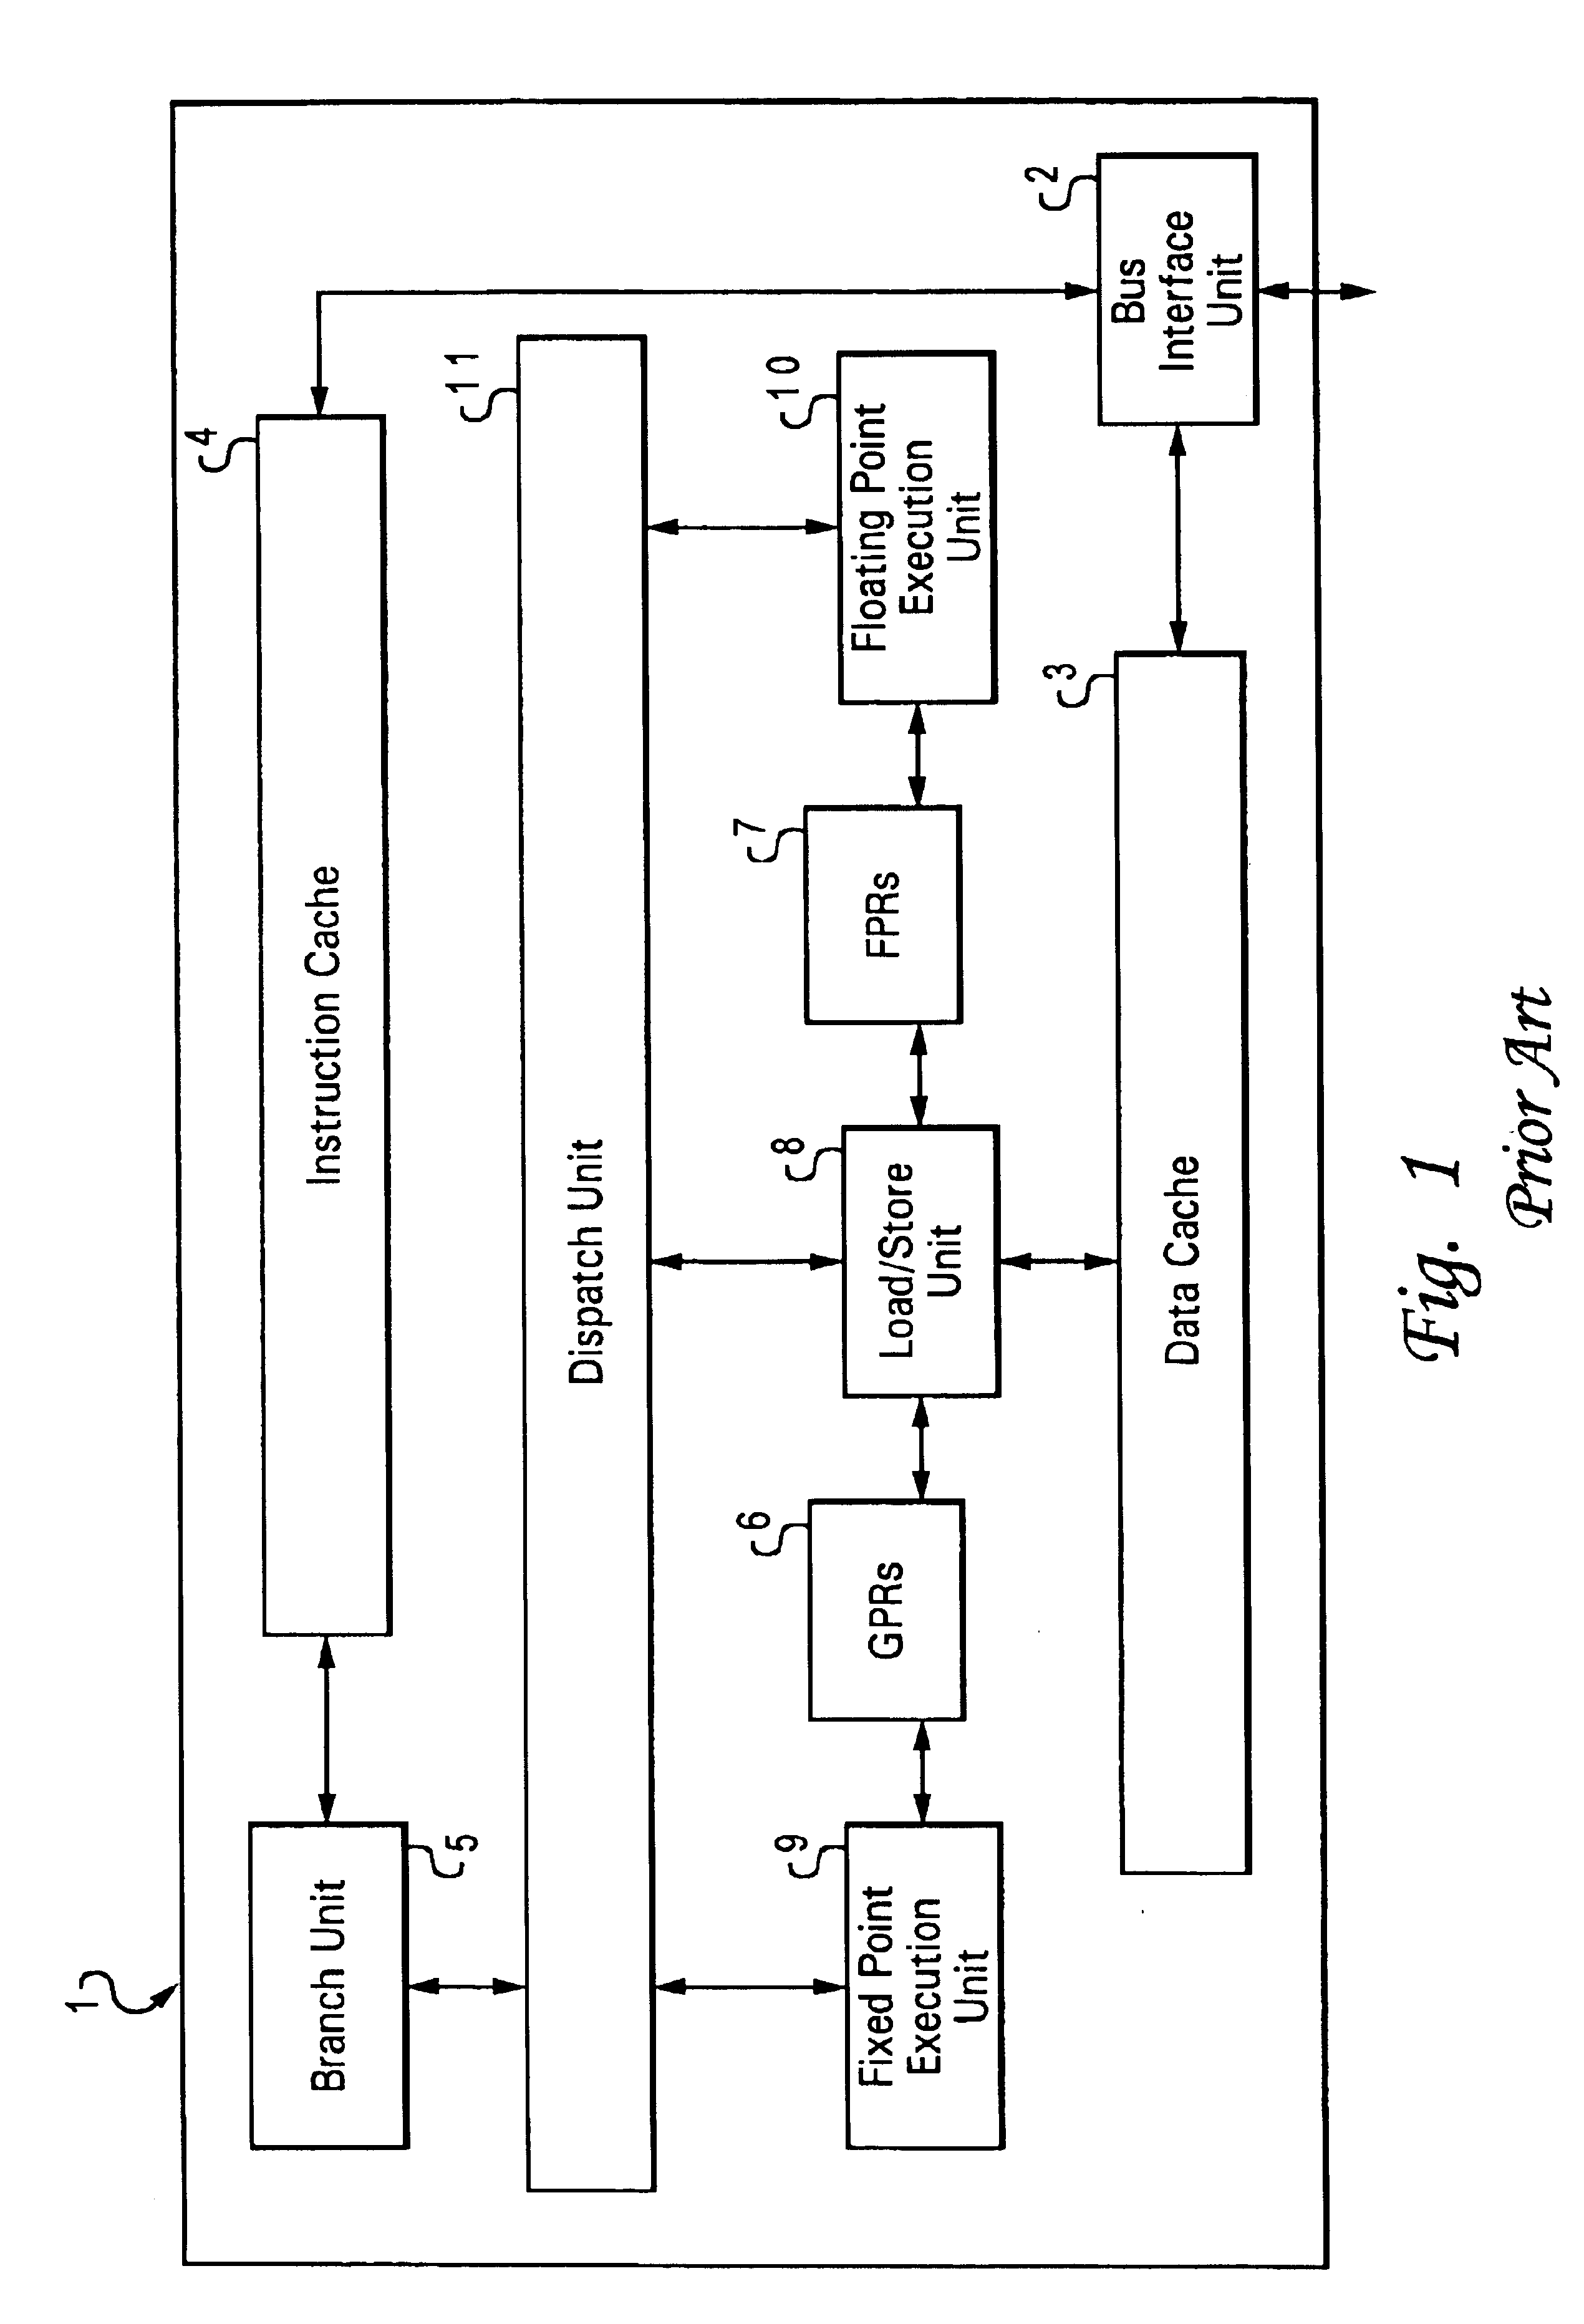 Method and apparatus for binary leading zero counting with constant-biased result